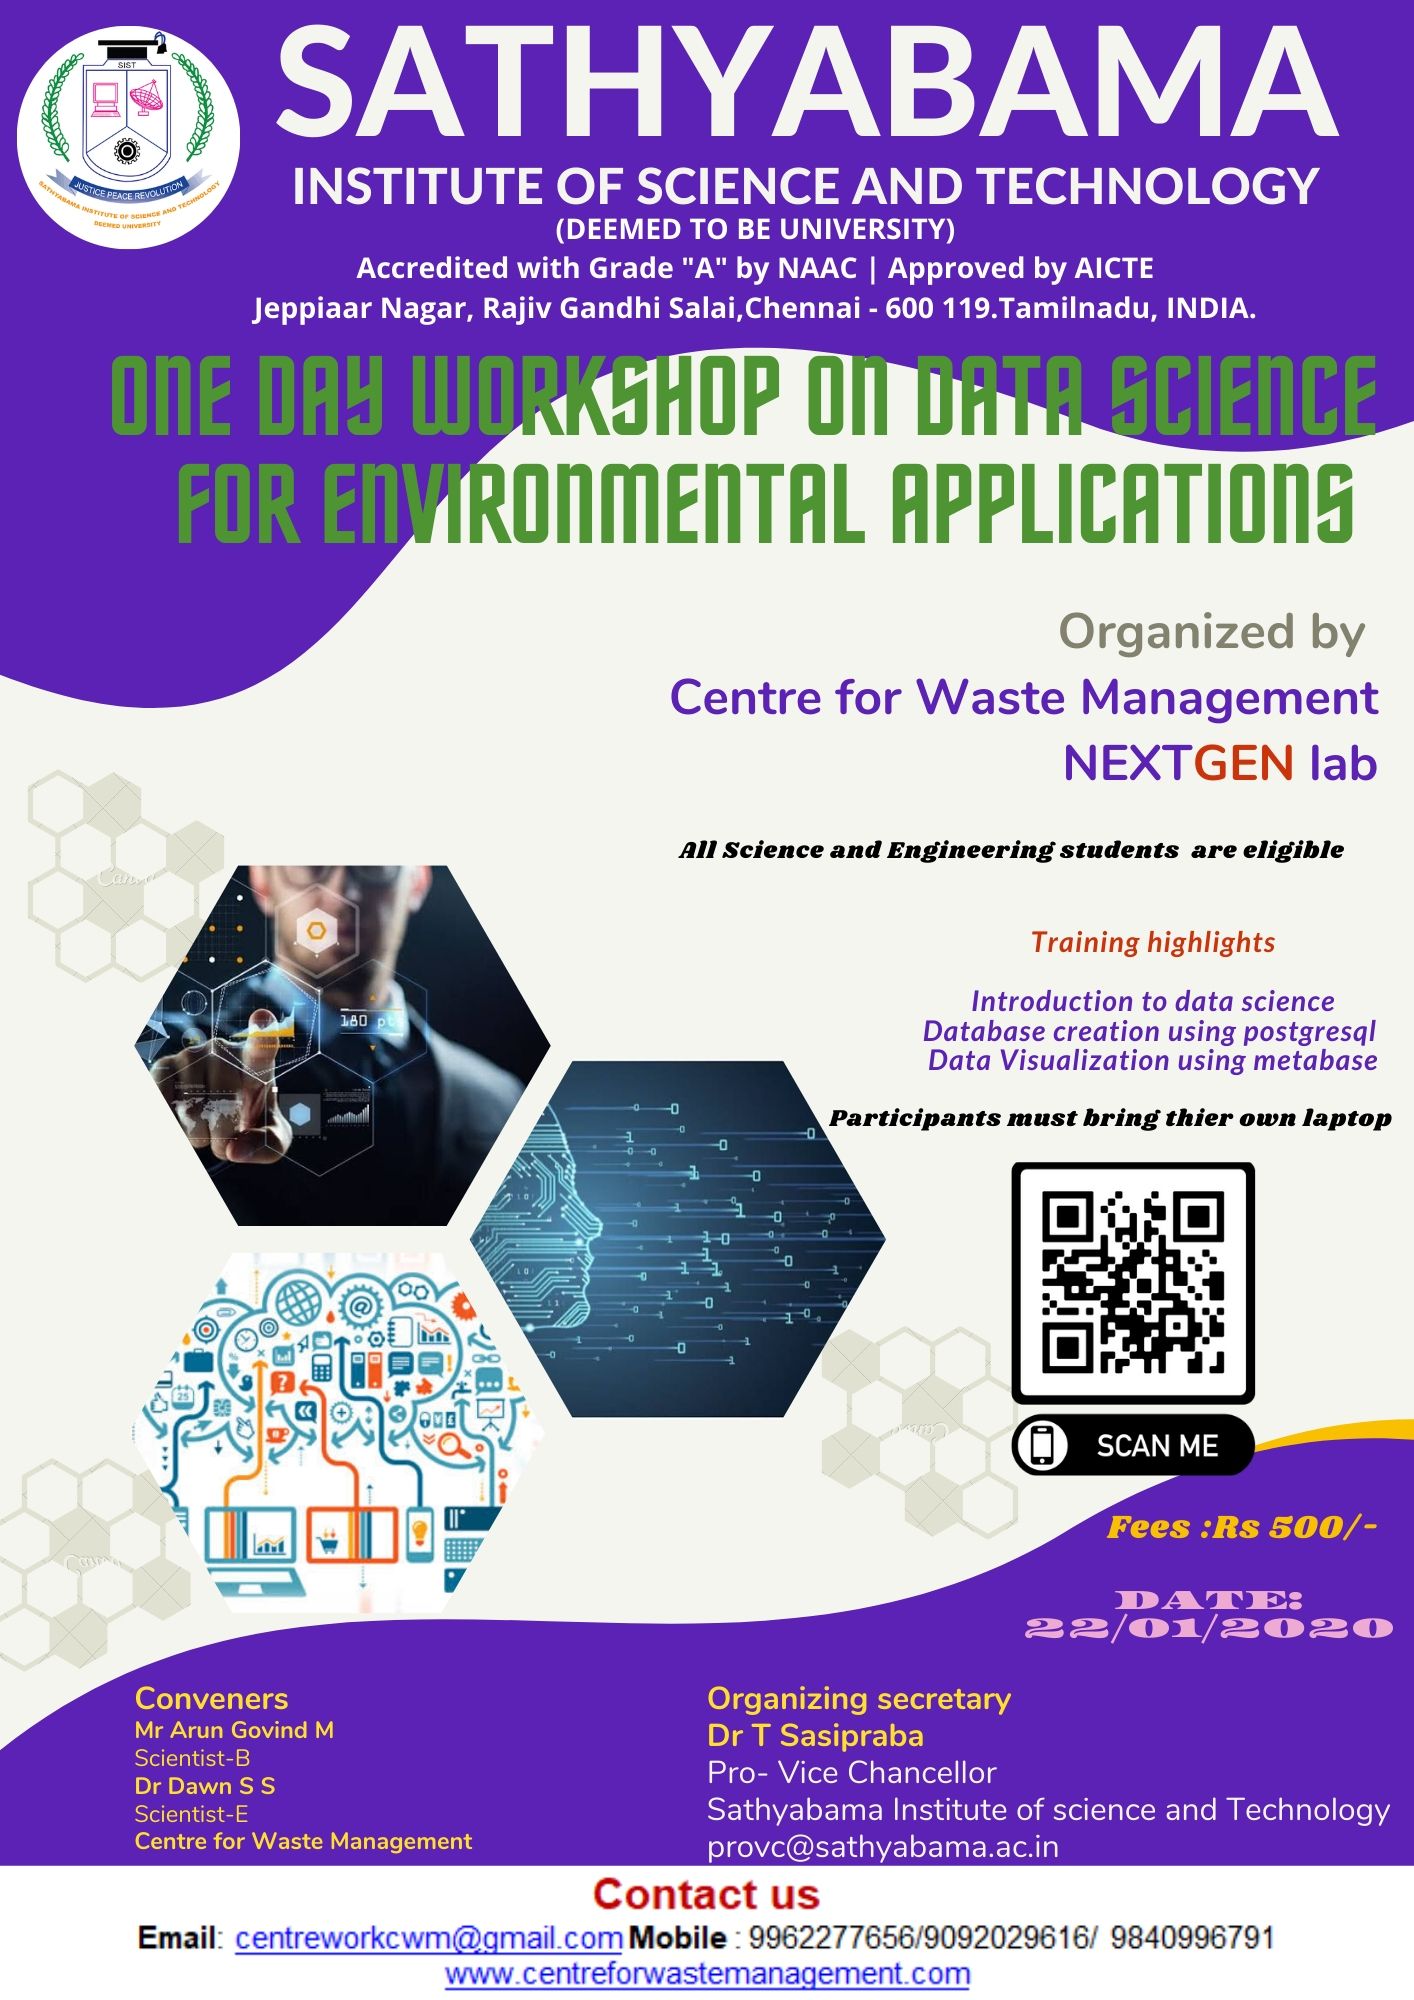 One Day Workshop on Data Science for Environmental Applications 2020